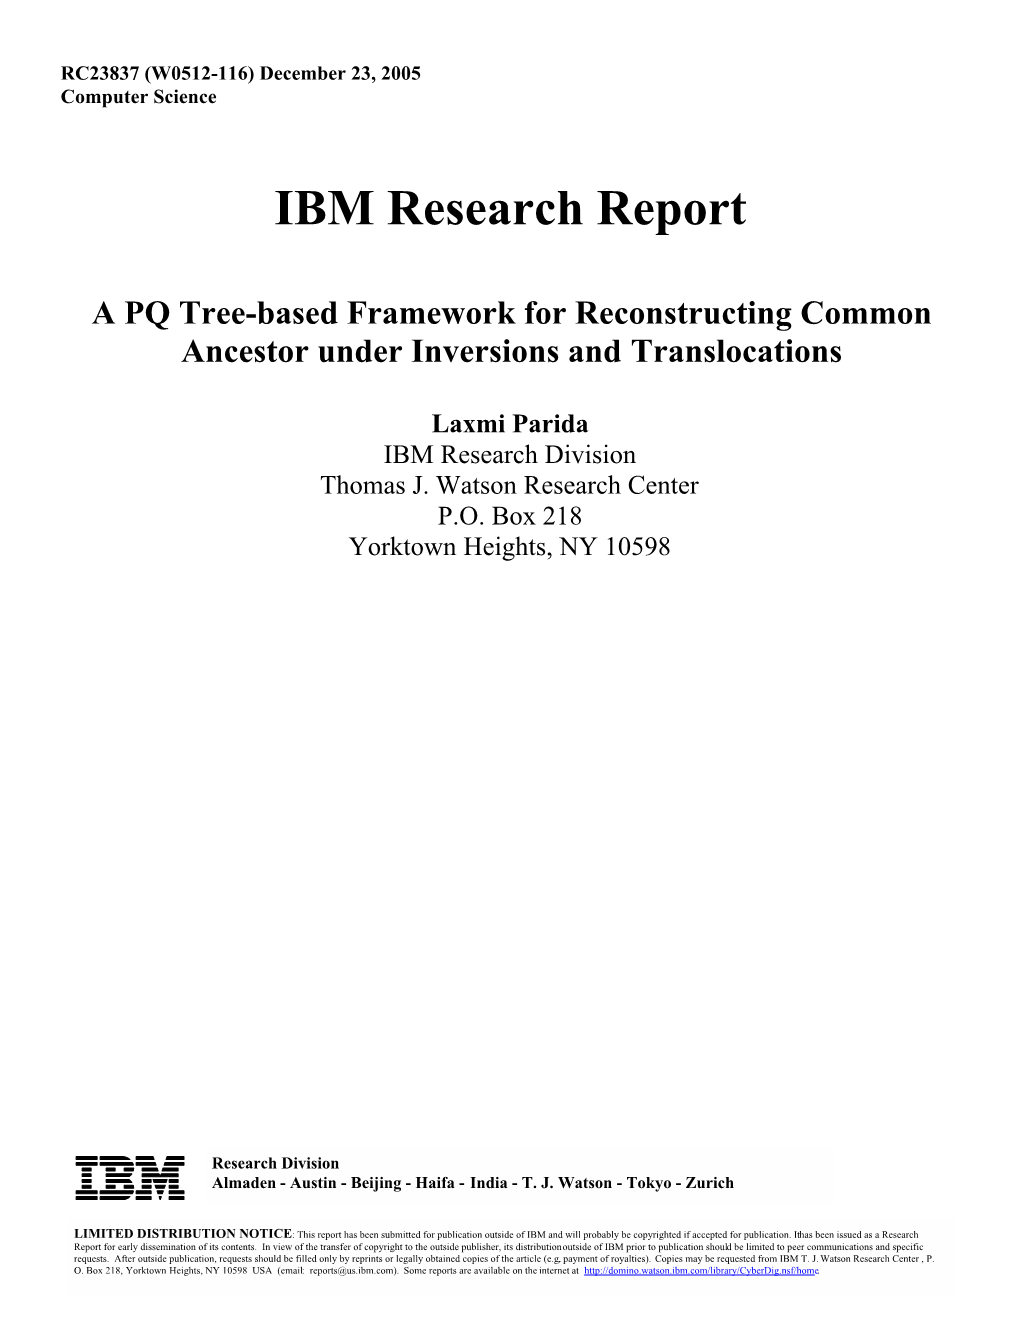 IBM Research Report a PQ Tree-Based Framework For